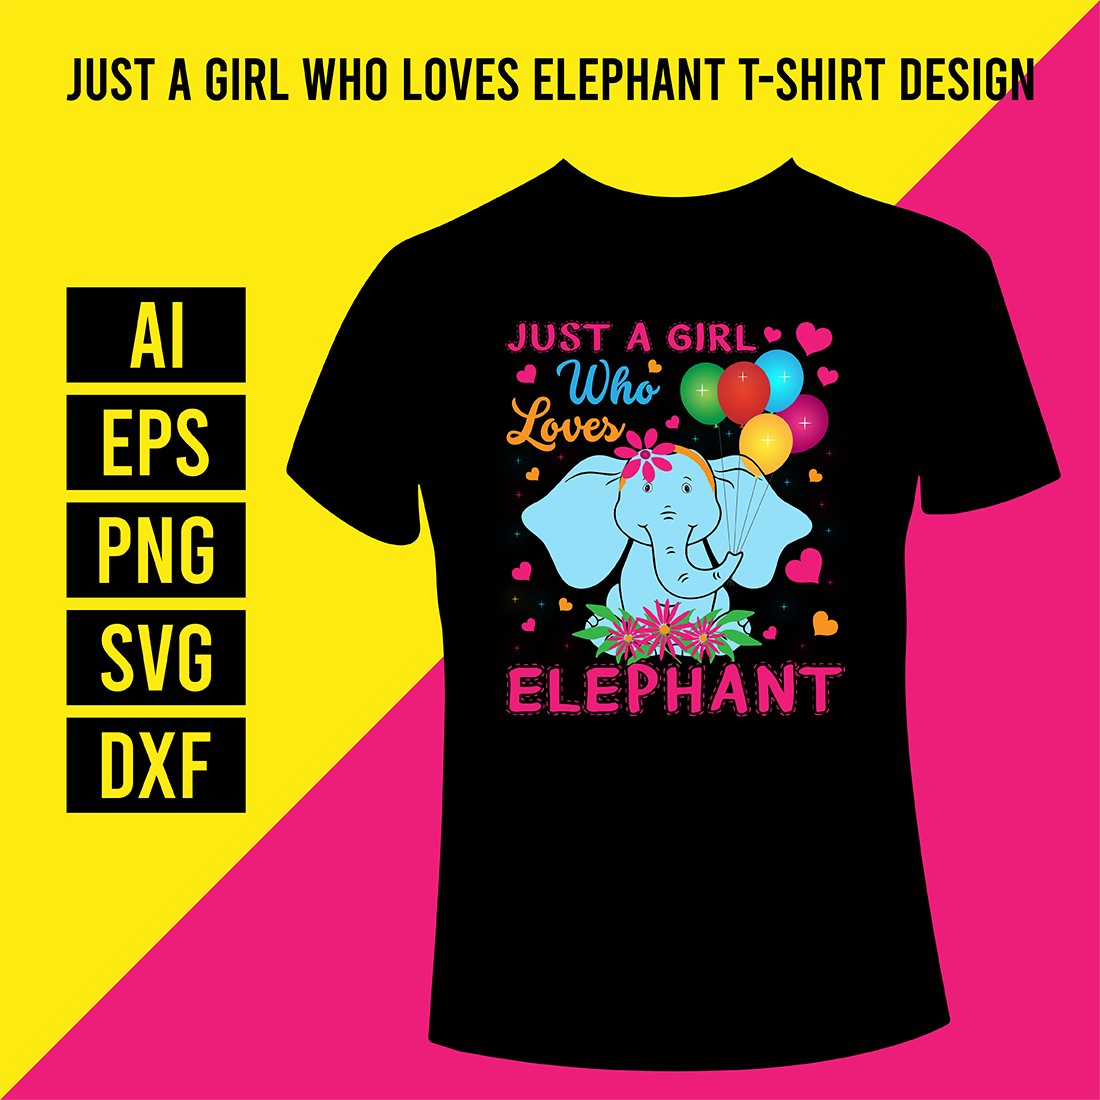 Just A Girl Who Loves Elephant T-Shirt Design cover image.